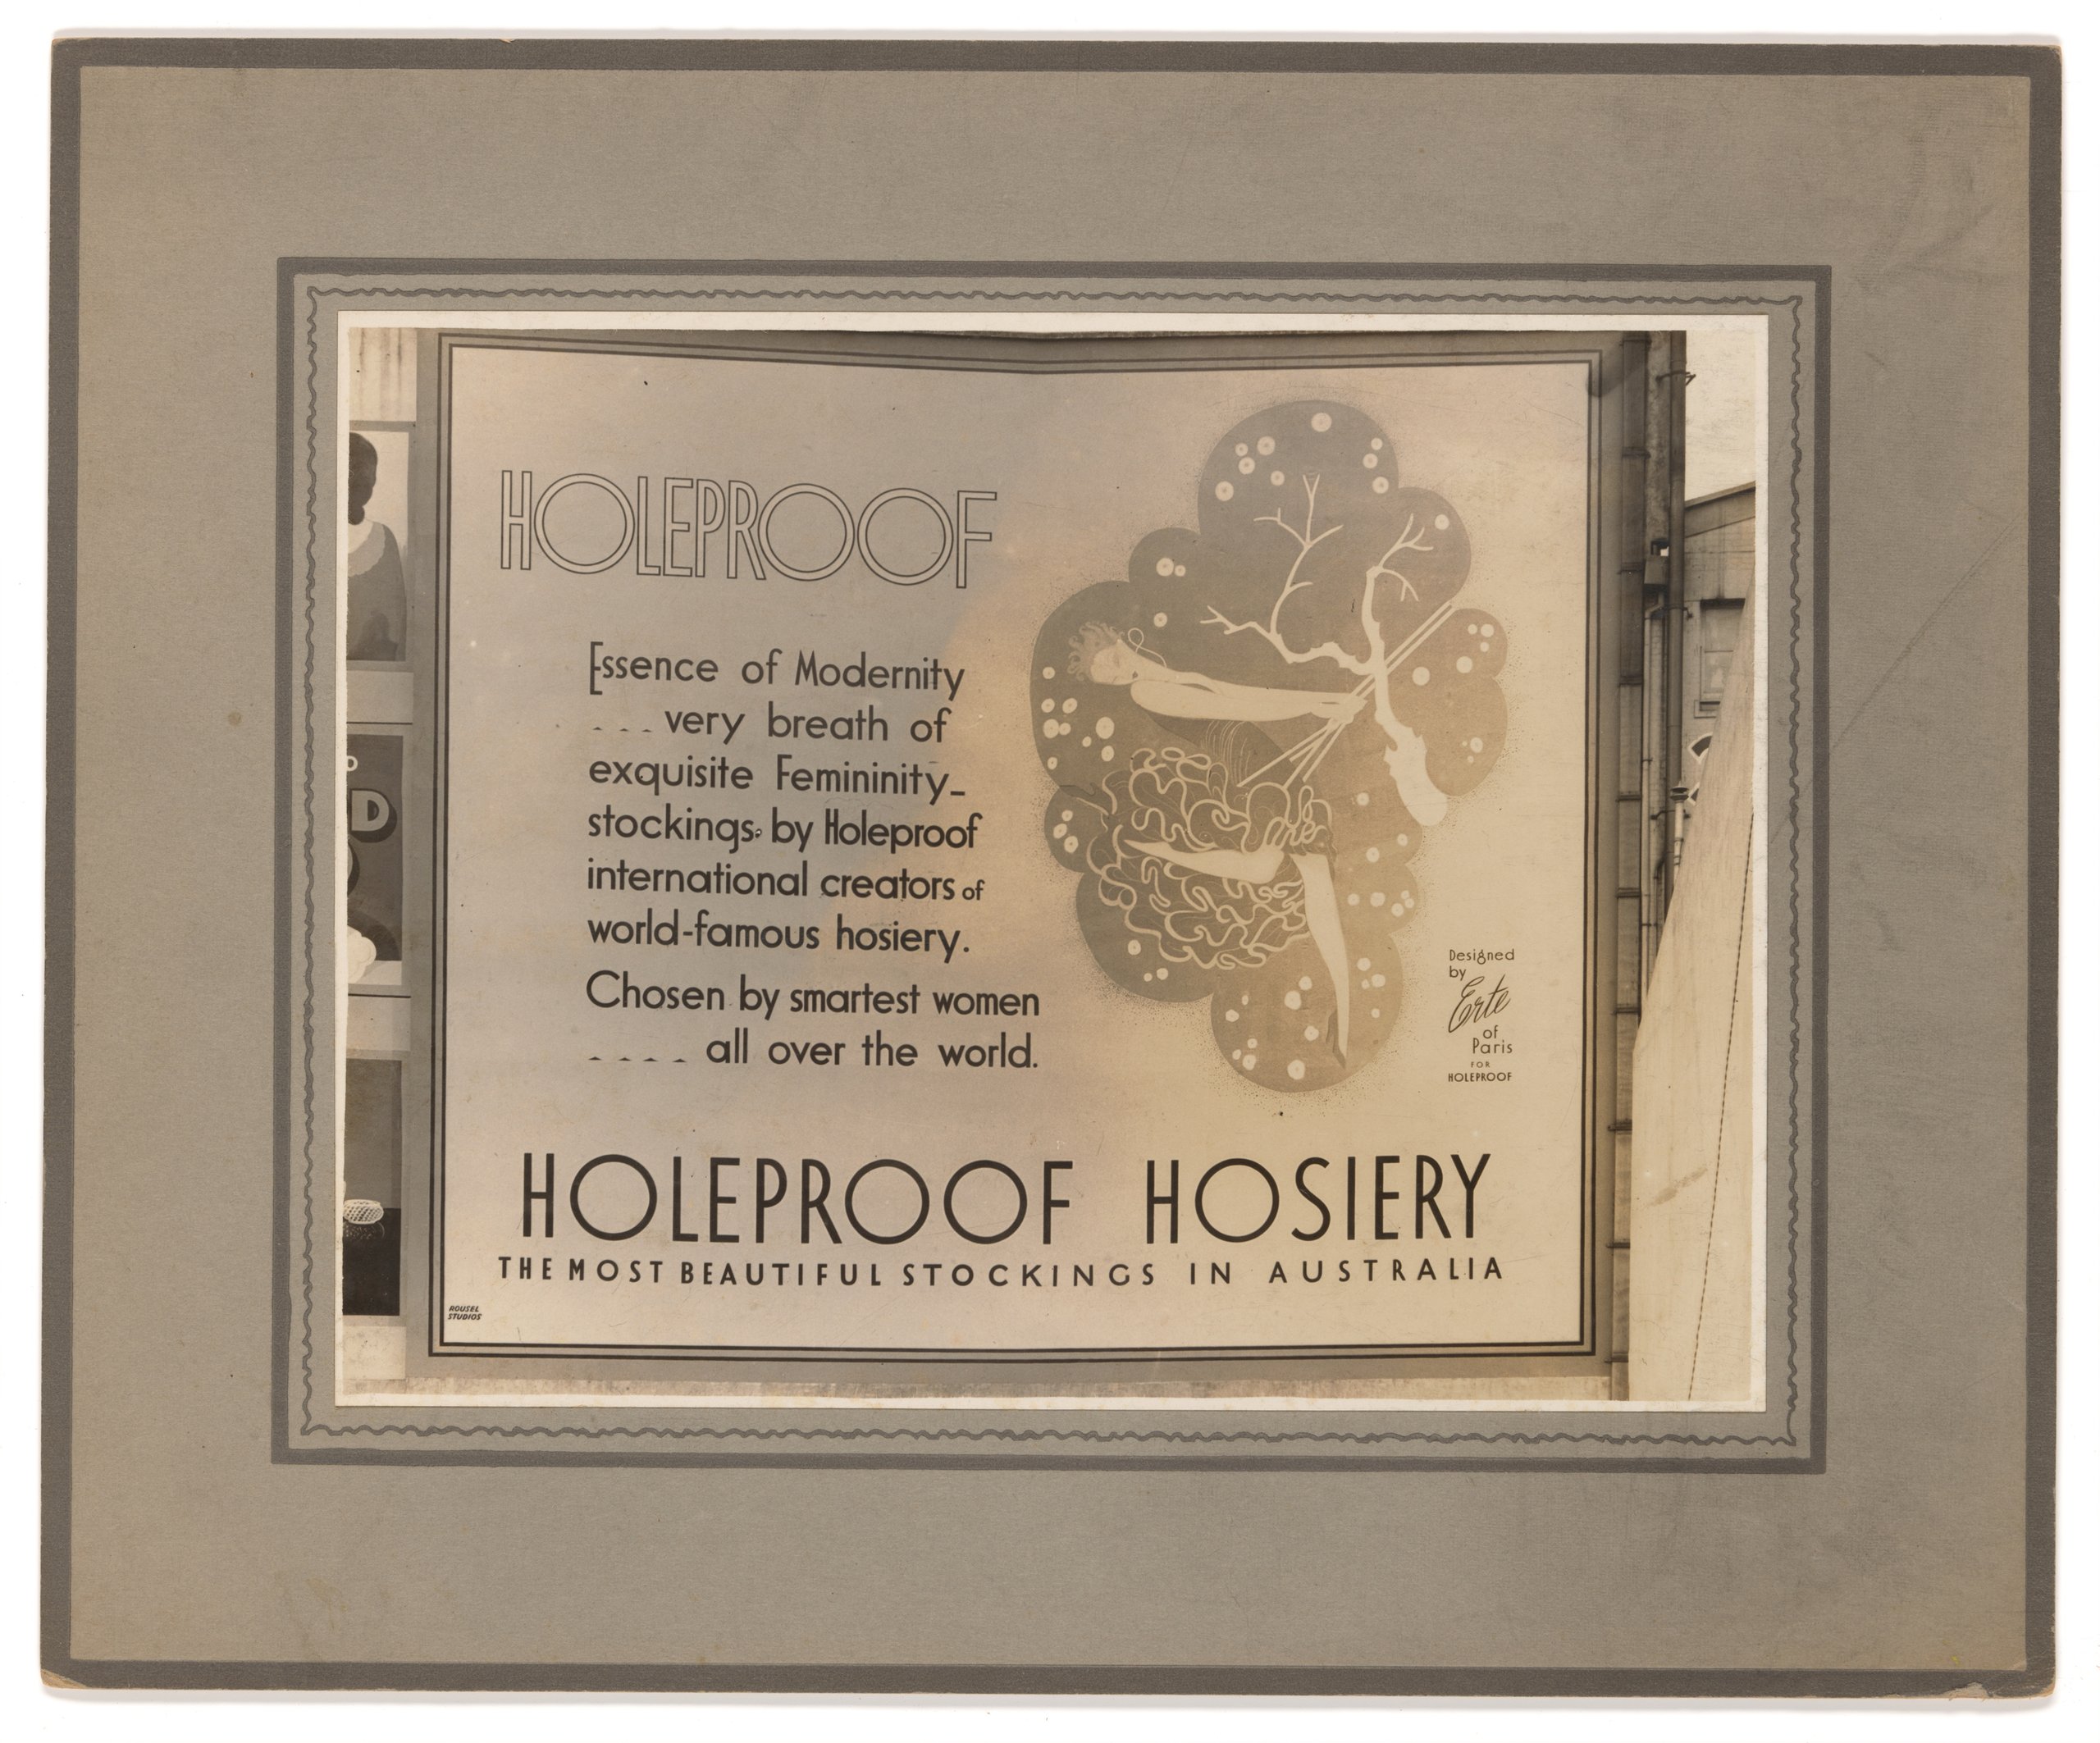 Photograph of advertising billboard for Holeproof Hosiery